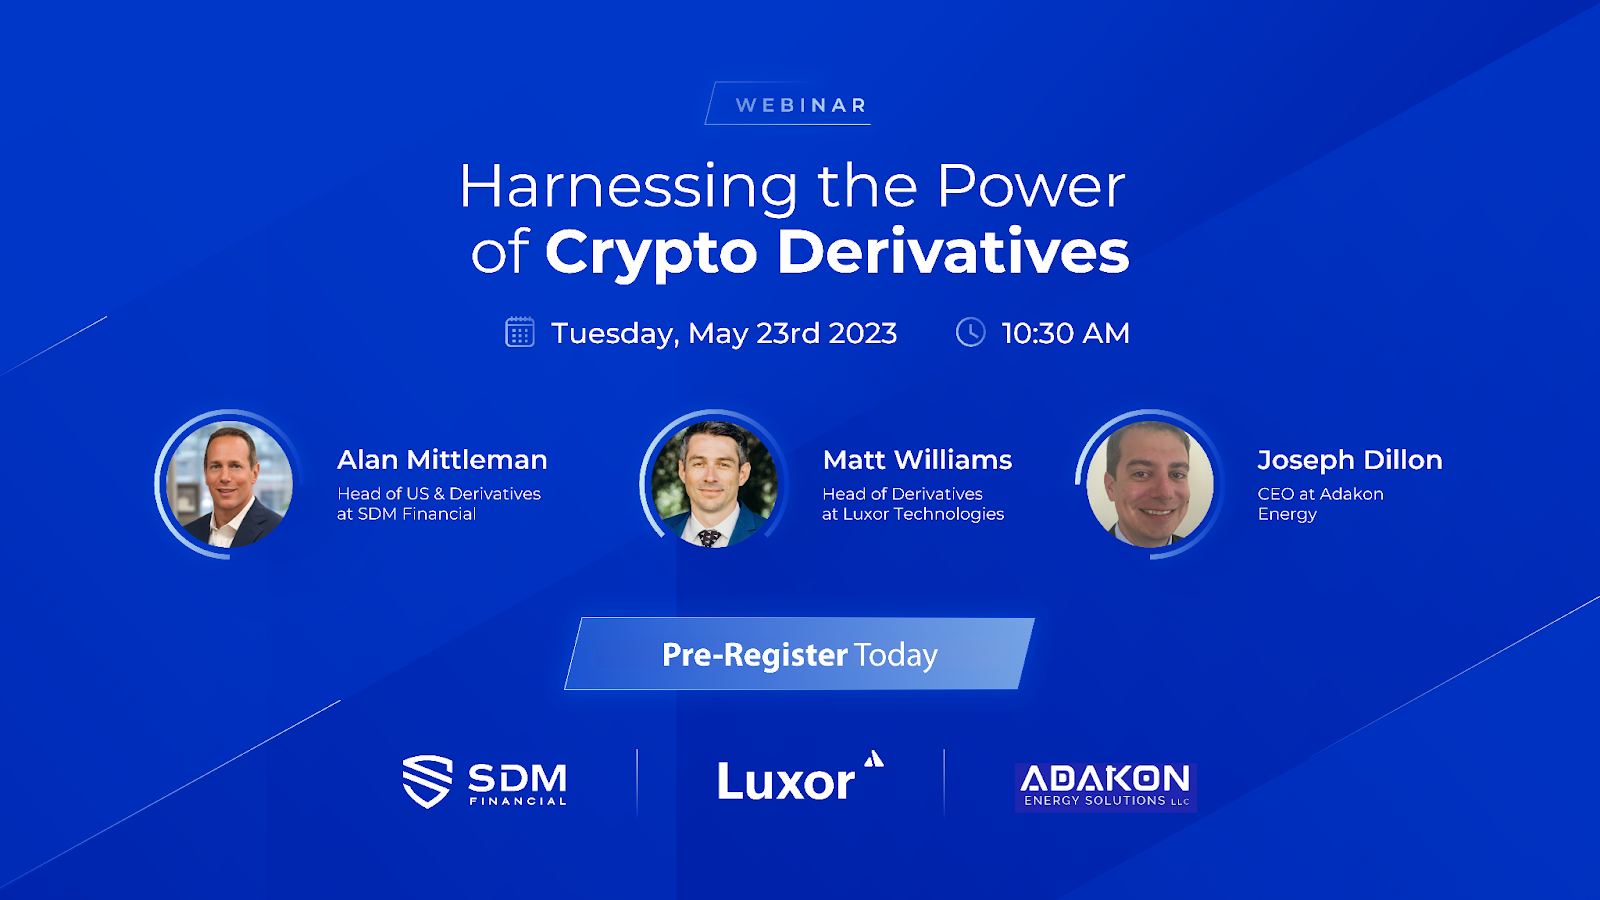 SDM Financial to Present Informative Webinar on Digital Asset Derivatives for Miners, Funds, and HNWIs – Press release Bitcoin News